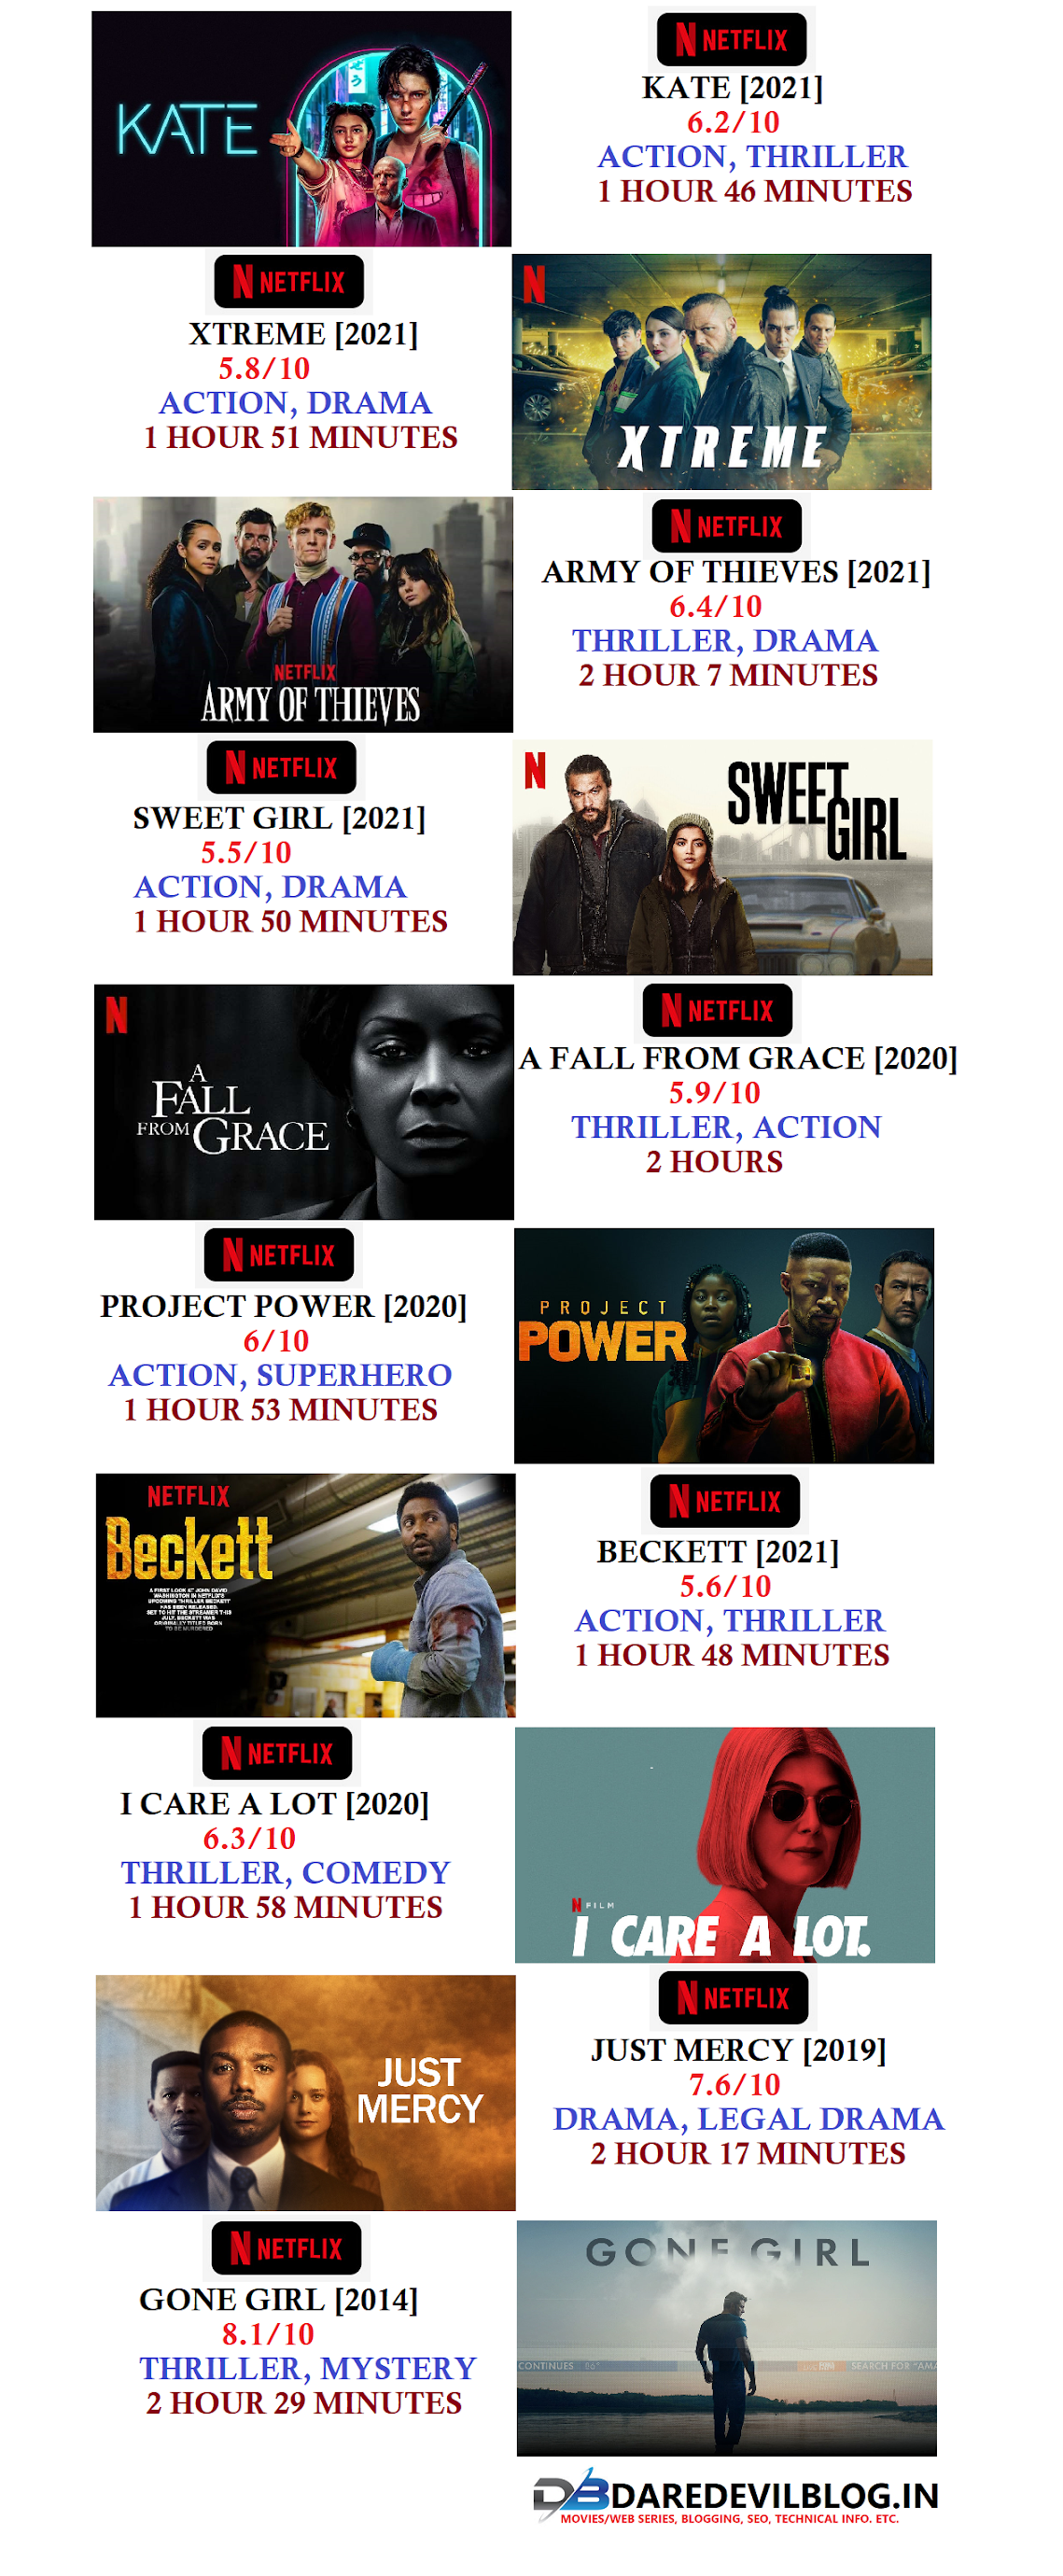 Top 10 Trending Web Series and Movies on Netflix 2021,Movies/ Web Series,Top 10 Trending Web Series on Netflix , Top 10 Trending Movies on Netflix, Netflix best web series, Netflix best movies